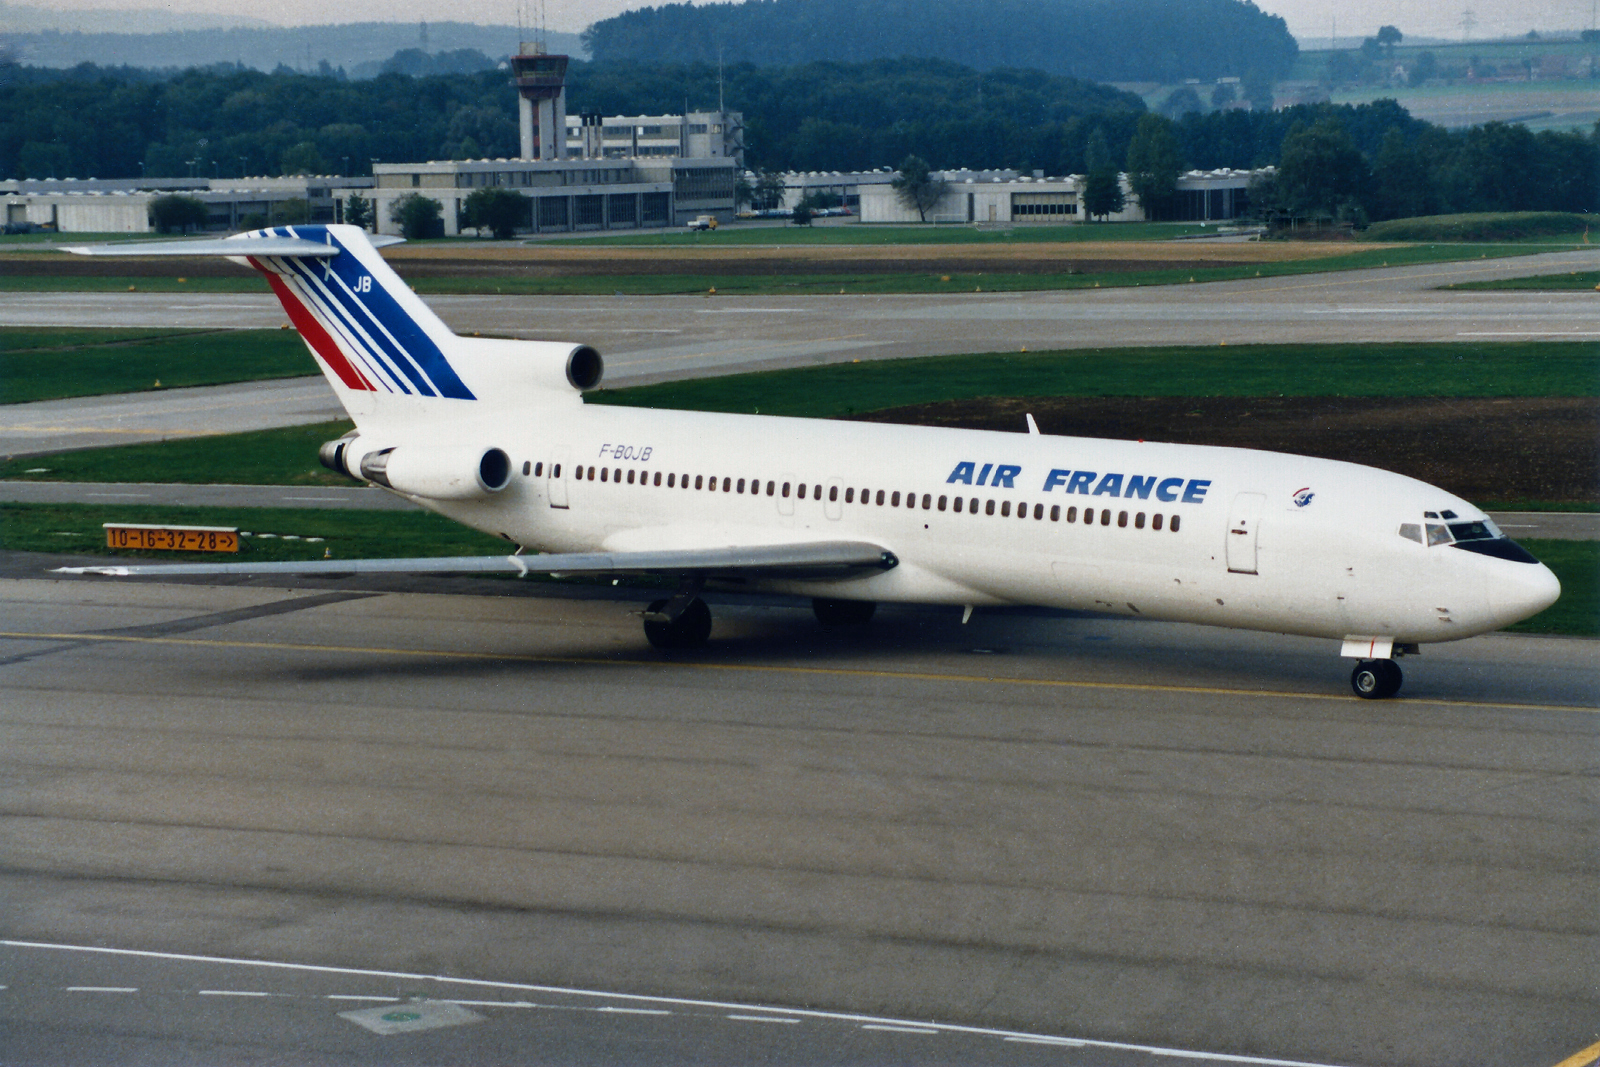 Air France - Wikimedia Commons